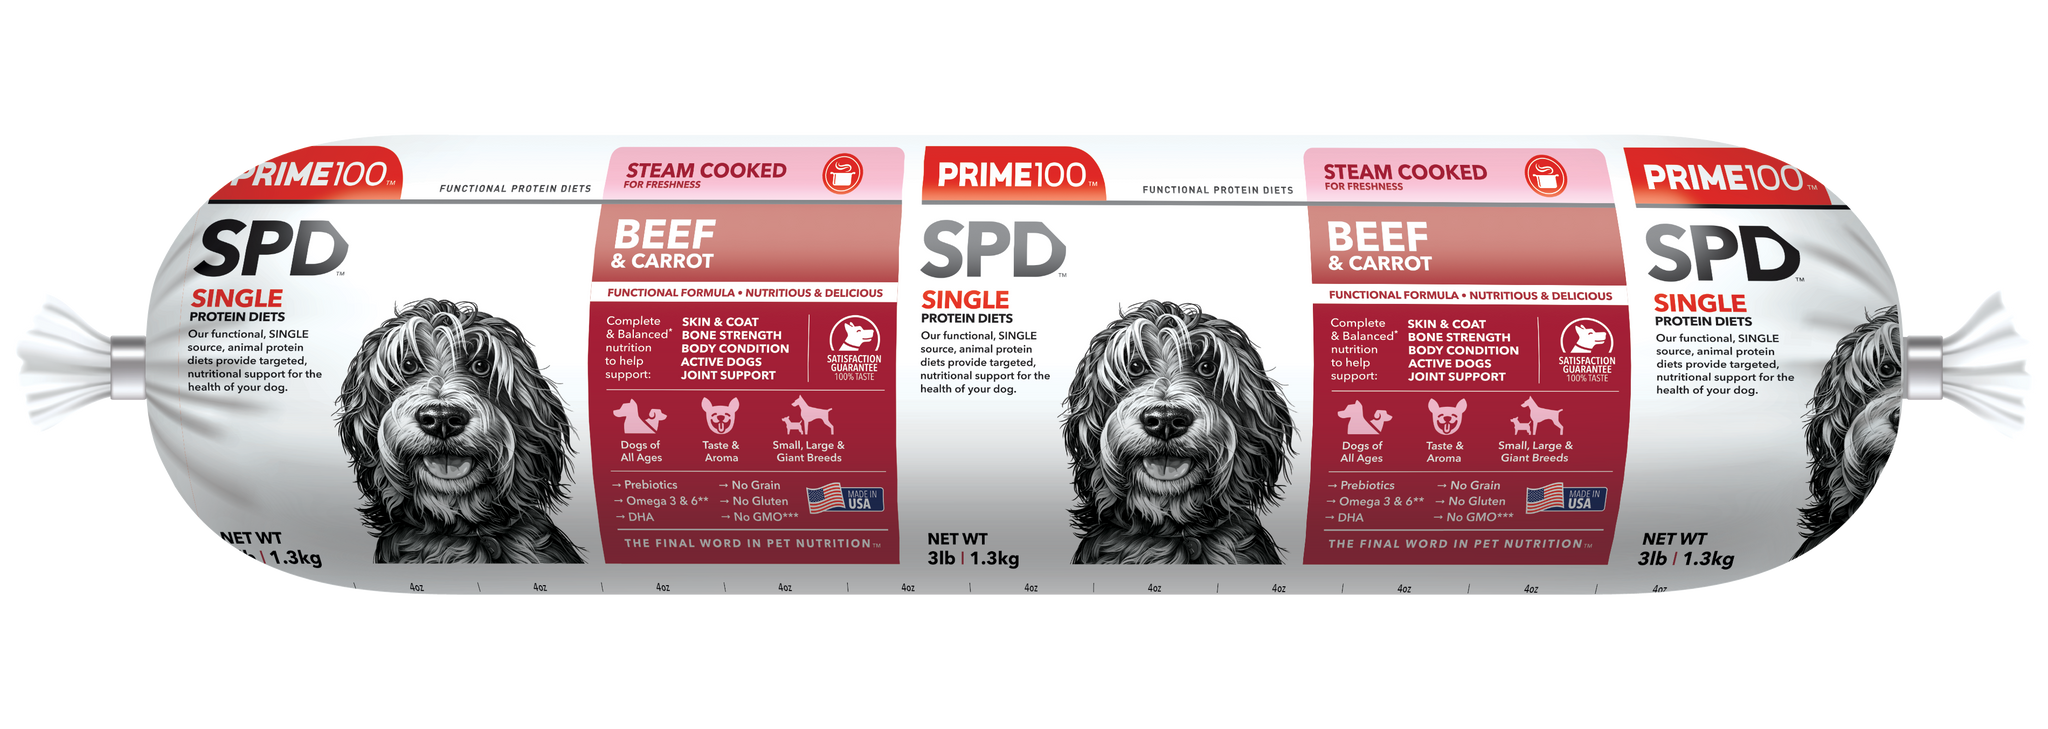 Prime 100 Single Protein Diet - Beef & Carrot Fresh Refrigerated Dog Food